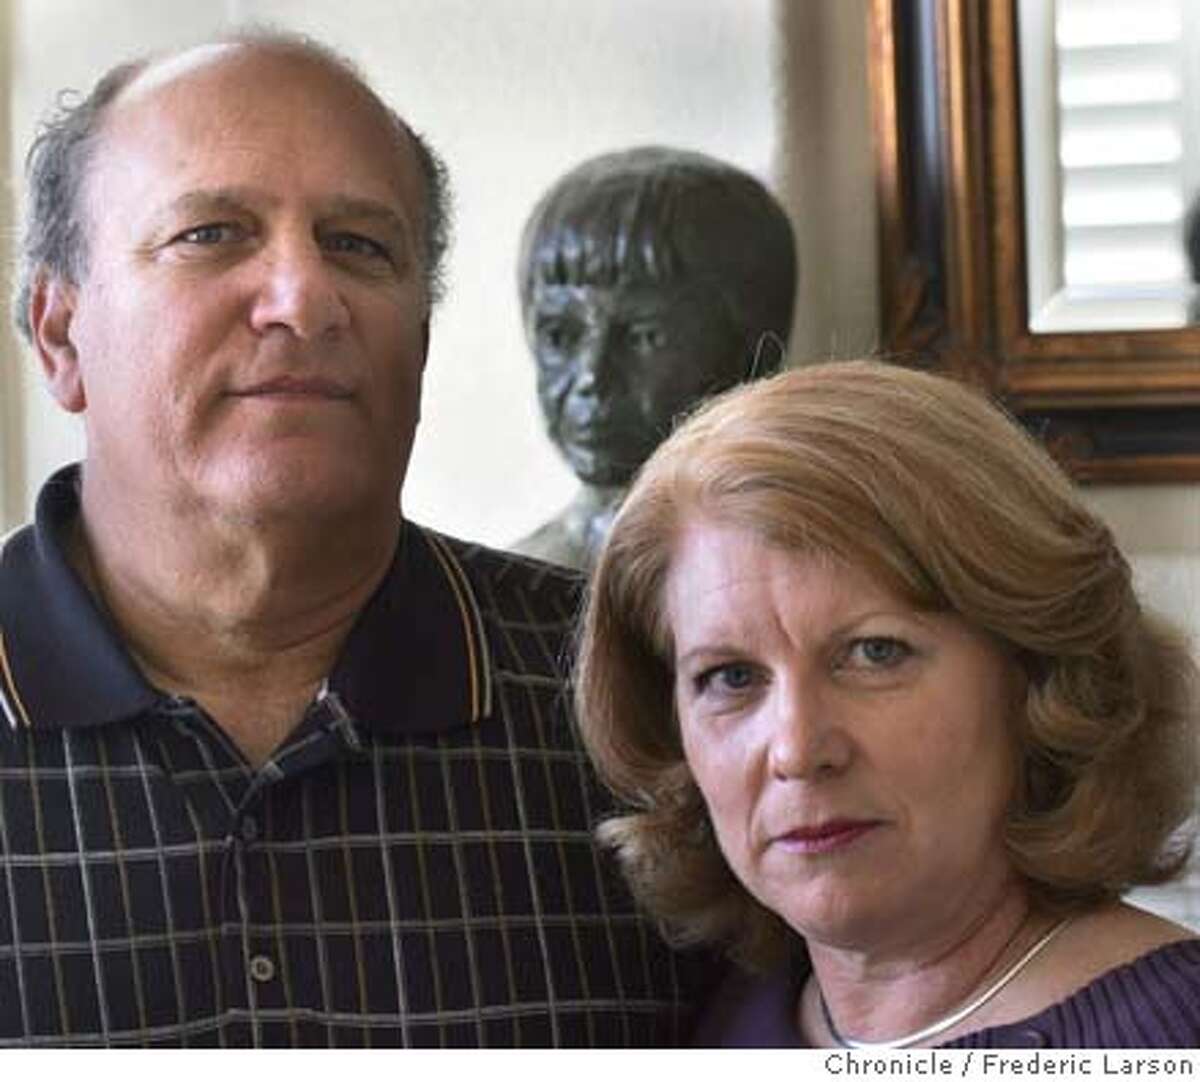 STEROIDS_102_fl.jpg Denise and Ray Garibaldi of Petaluma lost their son Rob (Rob busted in background) who was a top-level prospect for professional baseball but spiraled amid use of steroids. 11/22/04 Petaluma CA Frederic Larson The San Francisco Chronicle